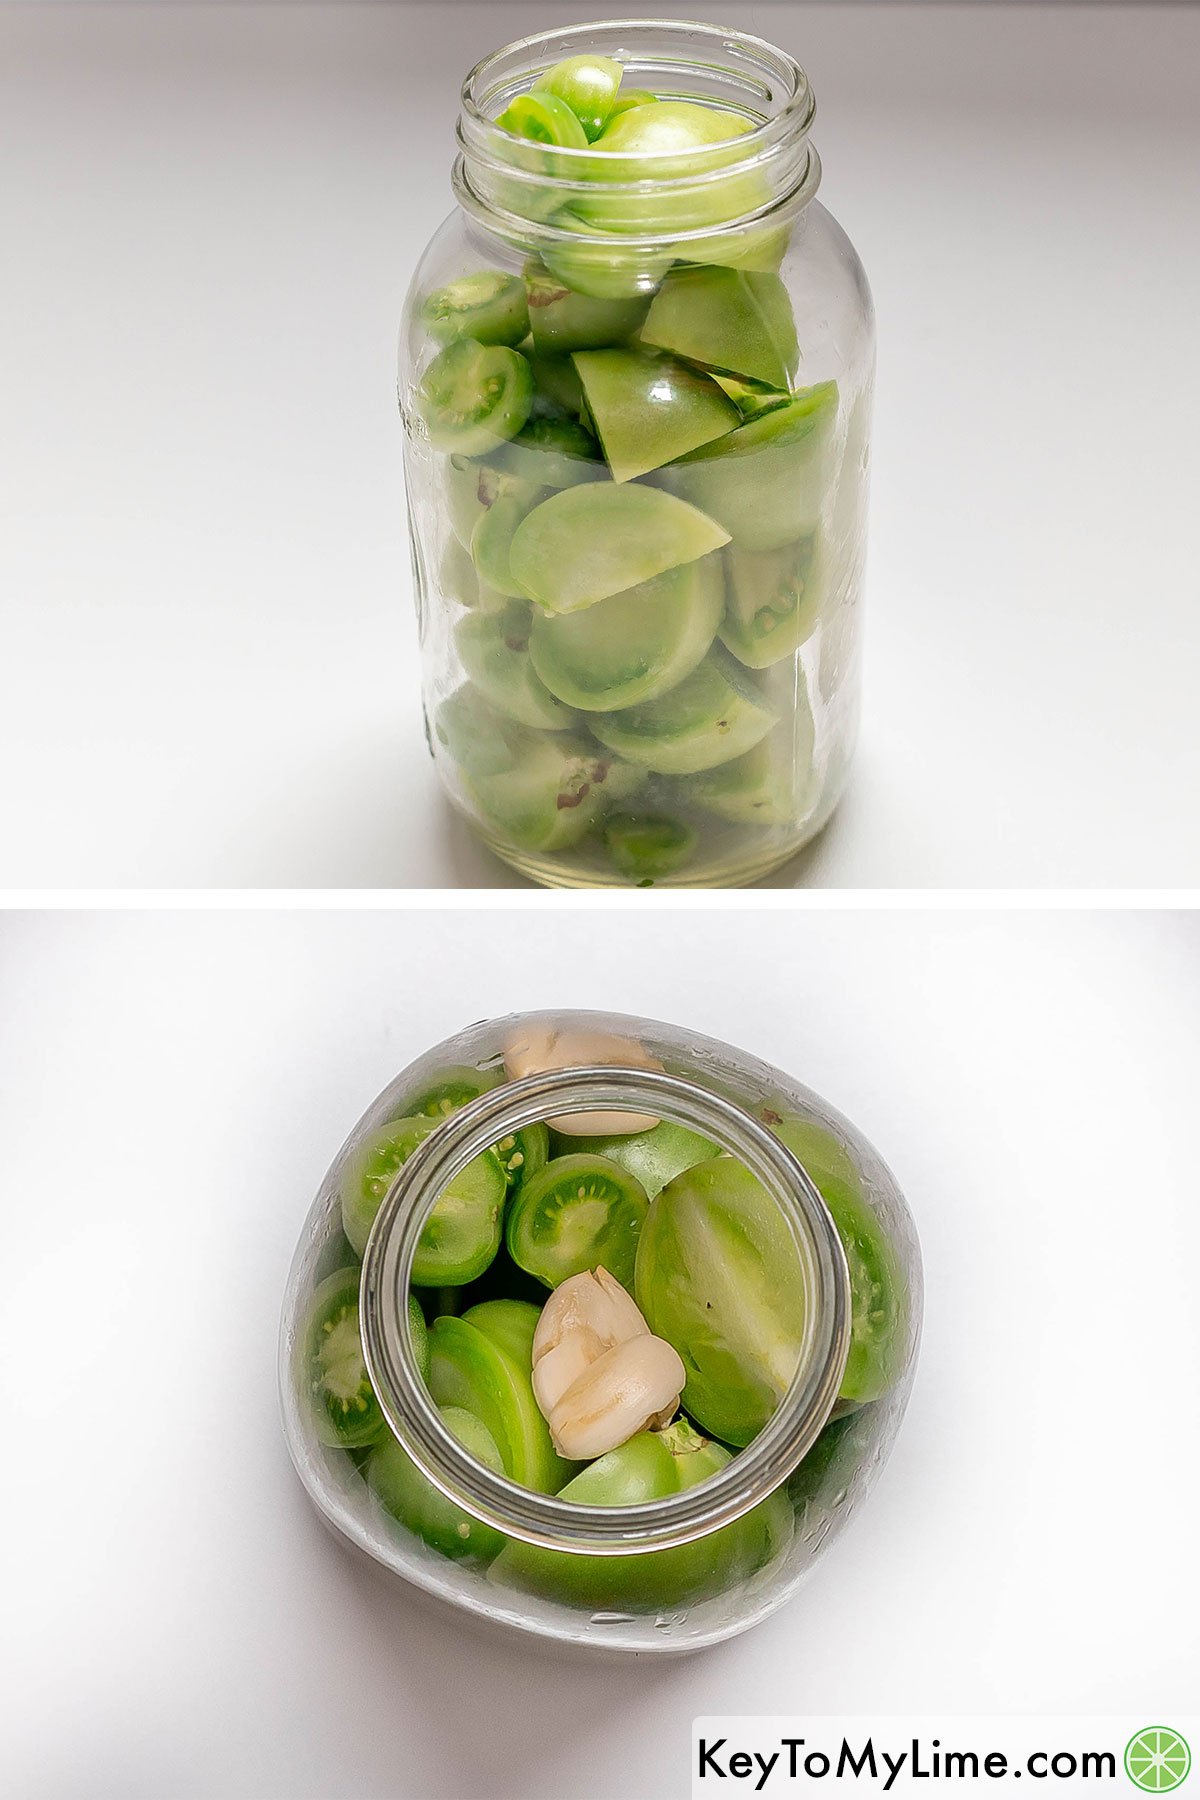 Filling the glass jar up with cut green tomatoes and adding in pressed garlic cloves.